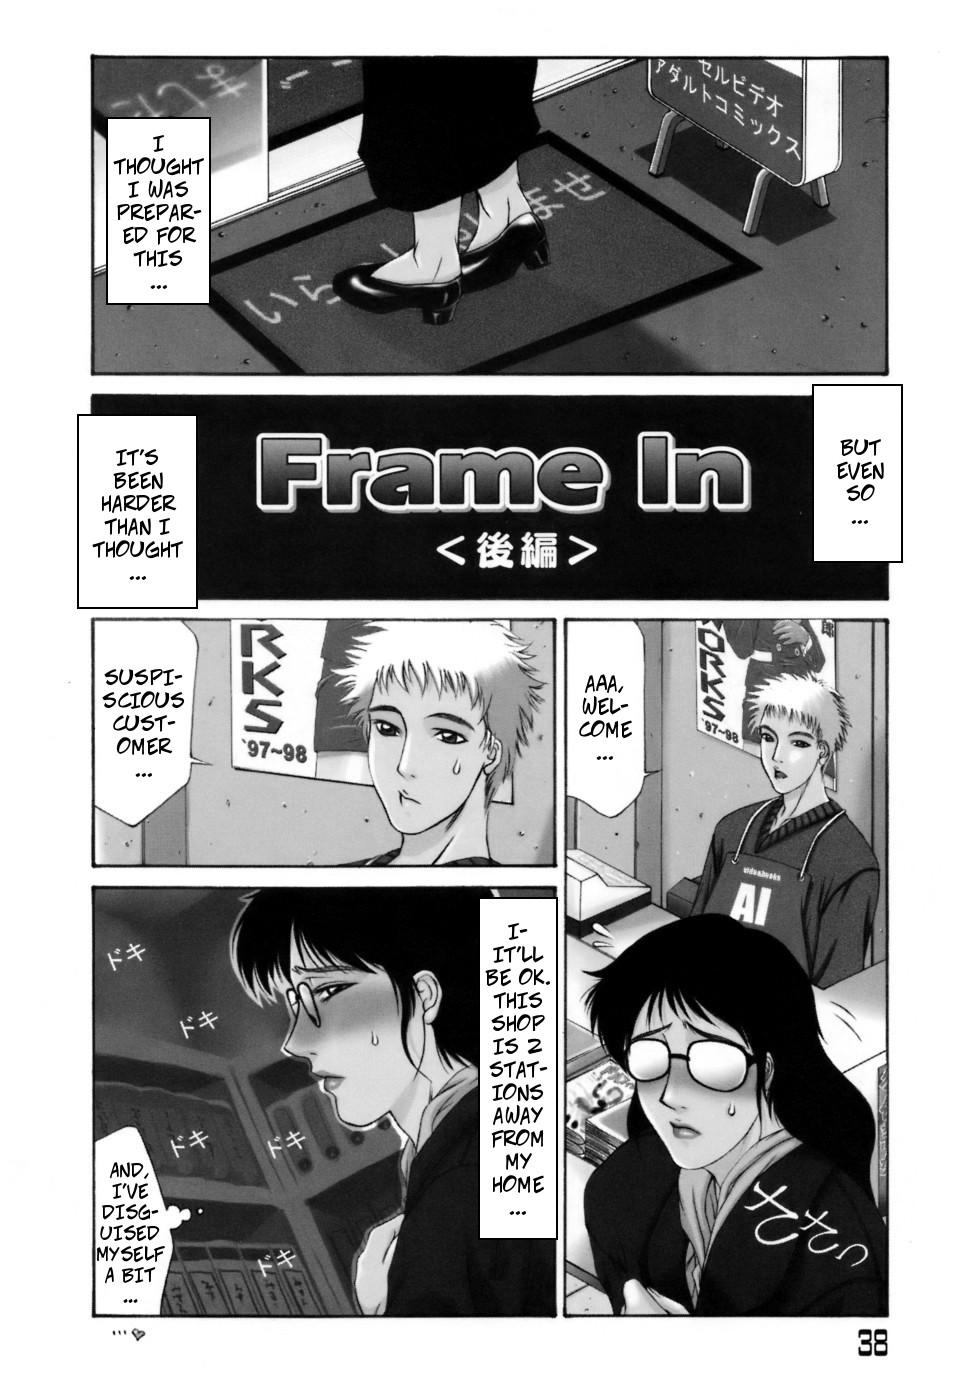 Cheat Frame In. Kouhen | Frame In 2 Pantyhose - Page 2